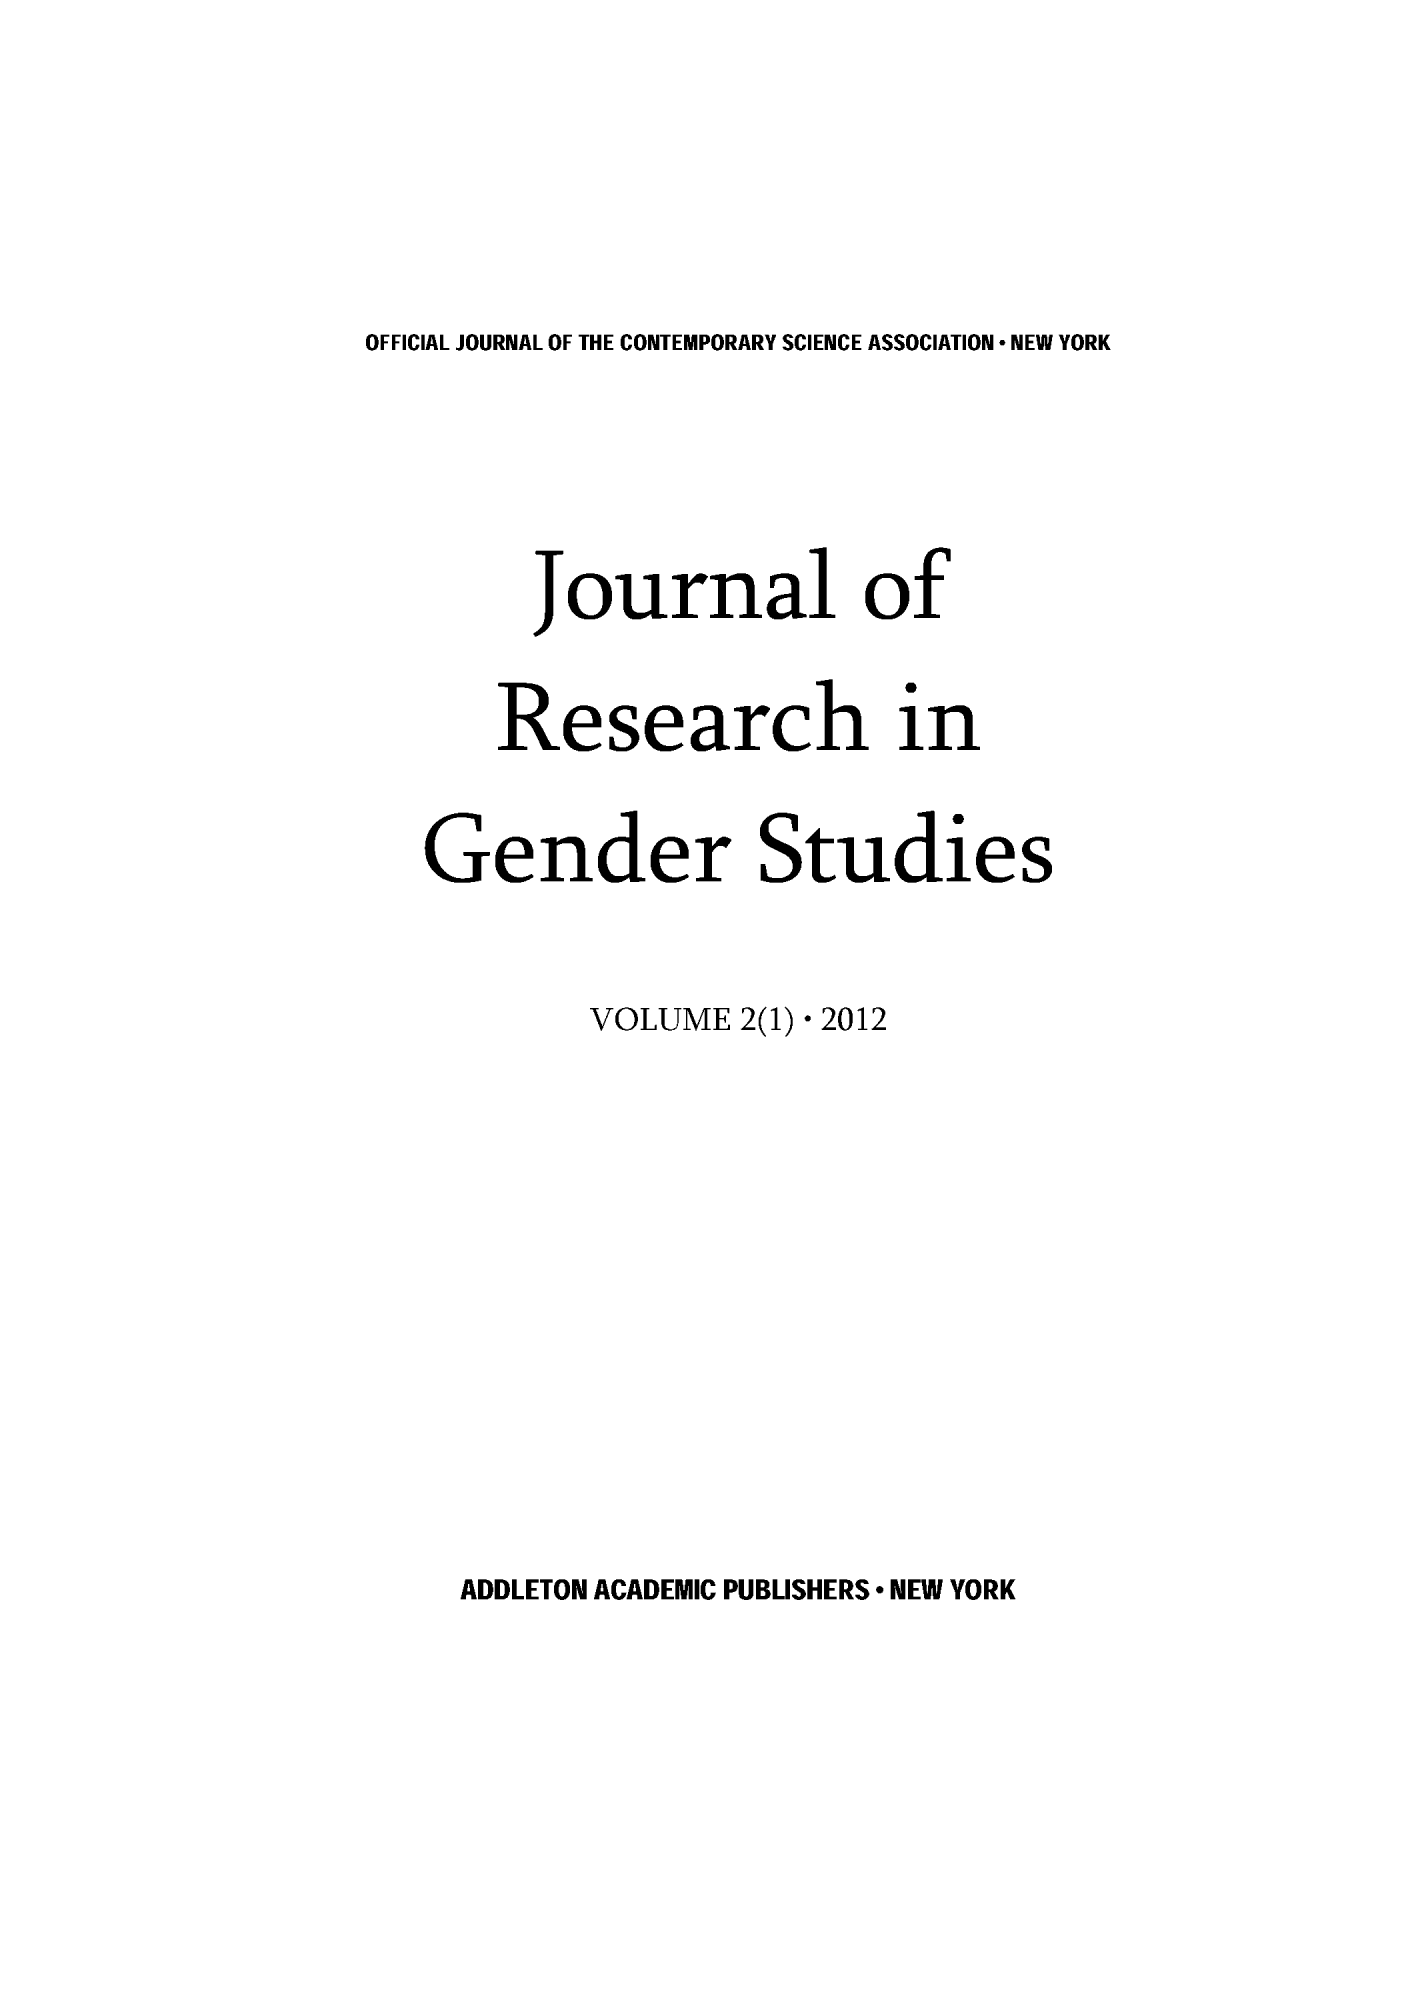 handle is hein.journals/jogenst2 and id is 1 raw text is: OFFICIAL JOURNAL OF THE CONTEMPORARY SCIENCE ASSOCIATION-NEW YORK

Journal of
Research in
Gender Studies
VOLUME 2(1)* 2012

ADDLETON ACADEMIC PUBLISHERS * NEW YORK


